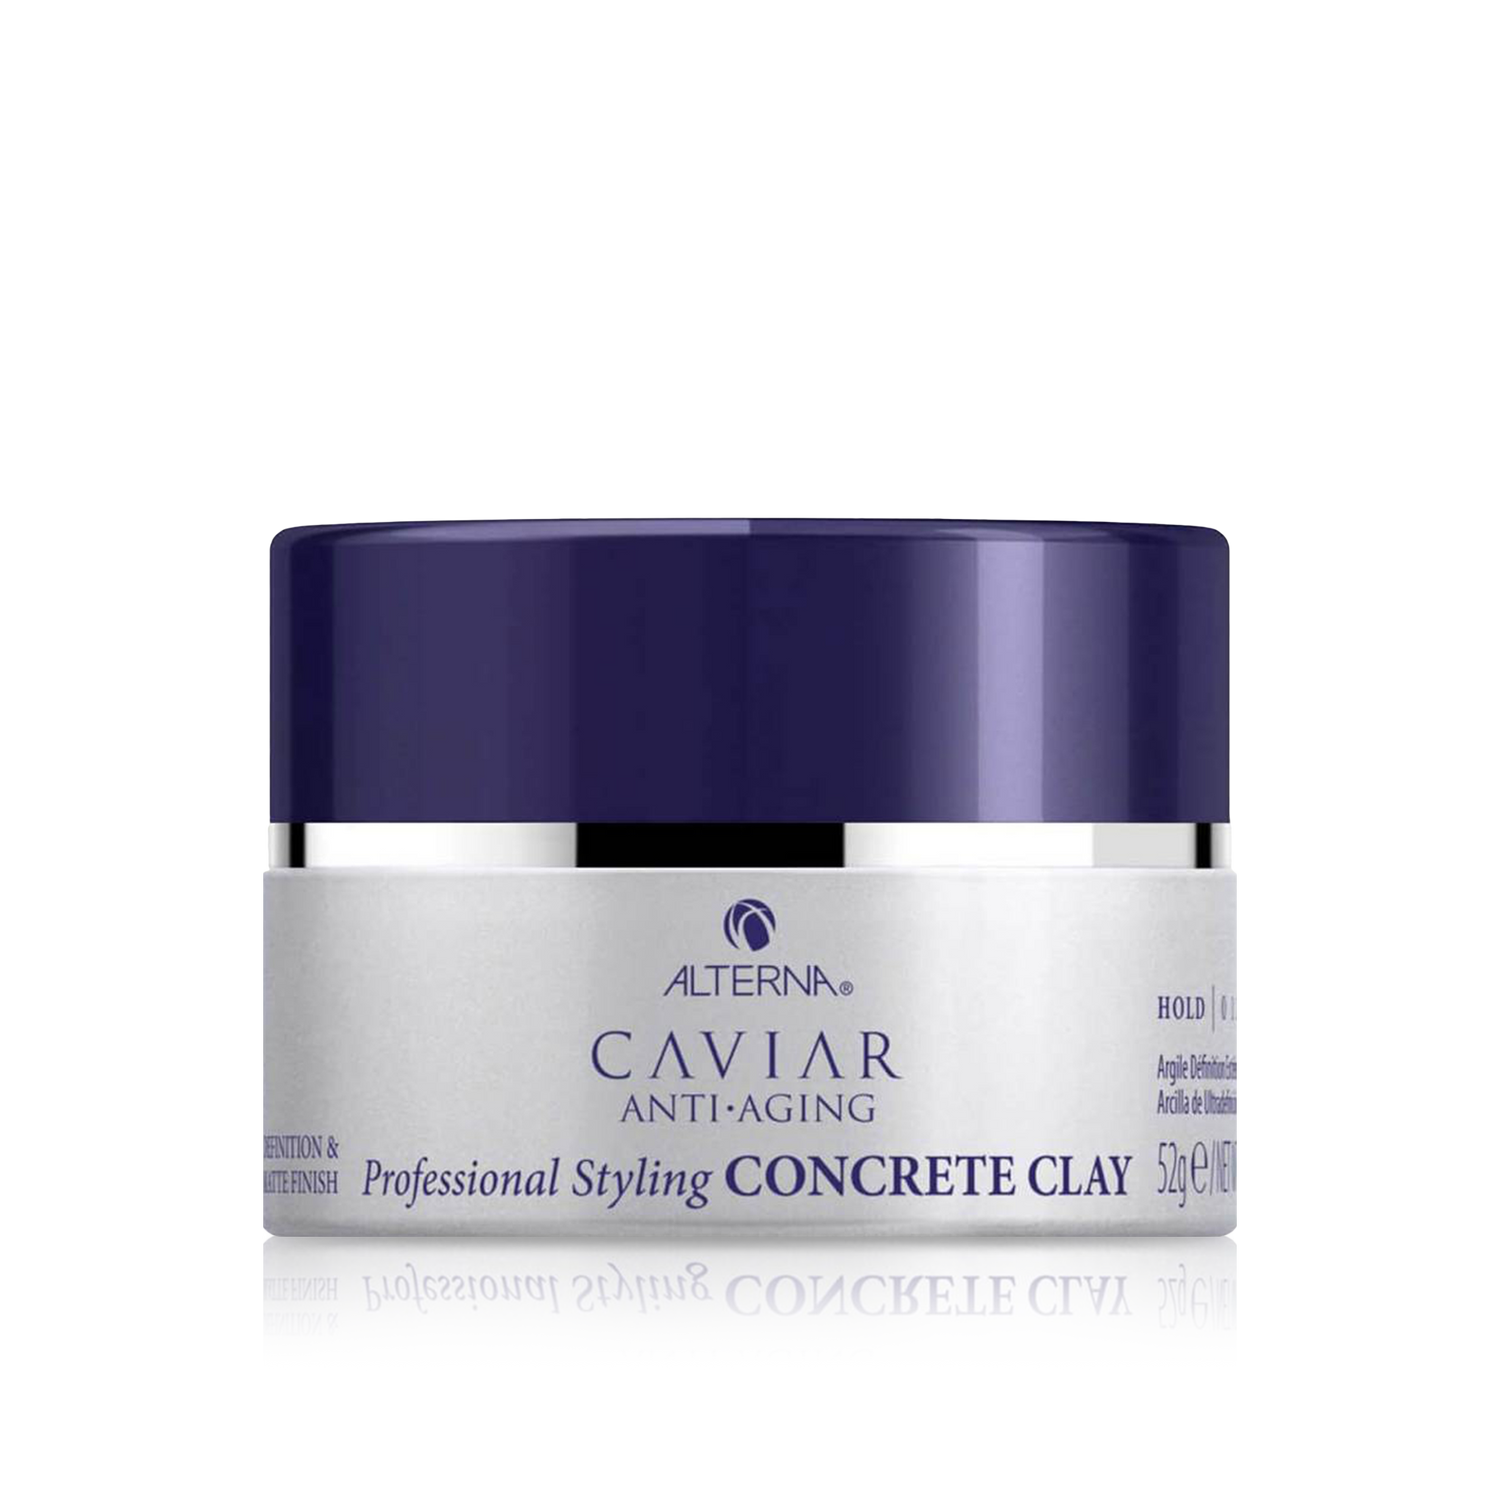 Caviar Anti-Aging Professional Styling Concrete Clay